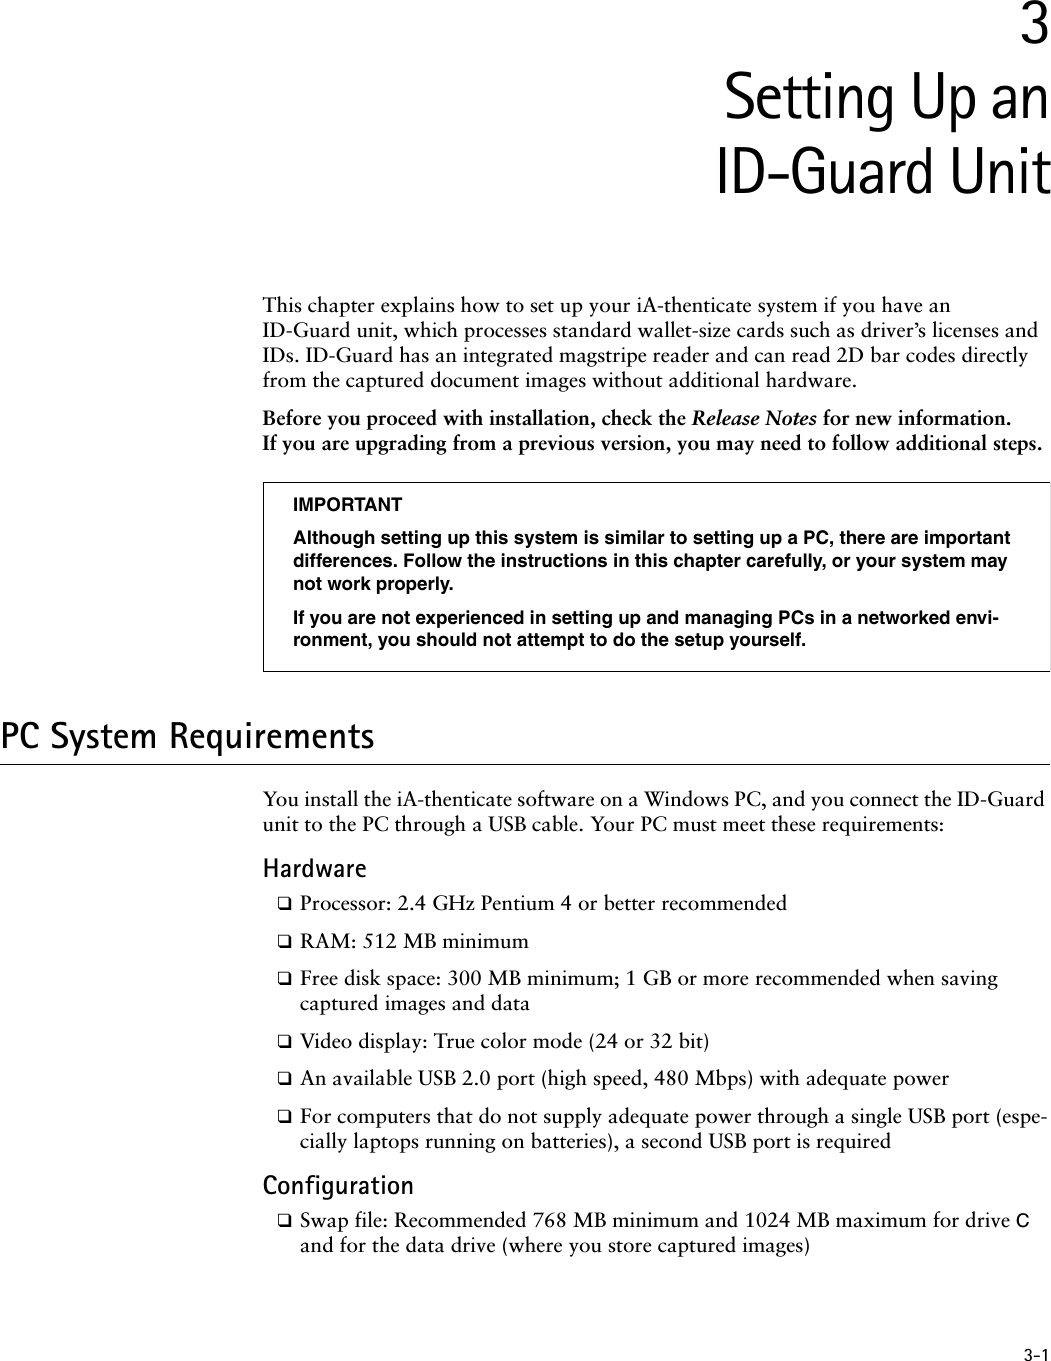 3-13Setting Up anID-Guard UnitThis chapter explains how to set up your iA-thenticate system if you have an ID-Guard unit, which processes standard wallet-size cards such as driver’s licenses and IDs. ID-Guard has an integrated magstripe reader and can read 2D bar codes directly from the captured document images without additional hardware.Before you proceed with installation, check the Release Notes for new information. If you are upgrading from a previous version, you may need to follow additional steps.PC System RequirementsYou install the iA-thenticate software on a Windows PC, and you connect the ID-Guard unit to the PC through a USB cable. Your PC must meet these requirements:Hardware❑Processor: 2.4 GHz Pentium 4 or better recommended❑RAM: 512 MB minimum❑Free disk space: 300 MB minimum; 1 GB or more recommended when saving captured images and data❑Video display: True color mode (24 or 32 bit)❑An available USB 2.0 port (high speed, 480 Mbps) with adequate power ❑For computers that do not supply adequate power through a single USB port (espe-cially laptops running on batteries), a second USB port is required Configuration❑Swap file: Recommended 768 MB minimum and 1024 MB maximum for drive C and for the data drive (where you store captured images)IMPORTANTAlthough setting up this system is similar to setting up a PC, there are important differences. Follow the instructions in this chapter carefully, or your system may not work properly.If you are not experienced in setting up and managing PCs in a networked envi-ronment, you should not attempt to do the setup yourself.